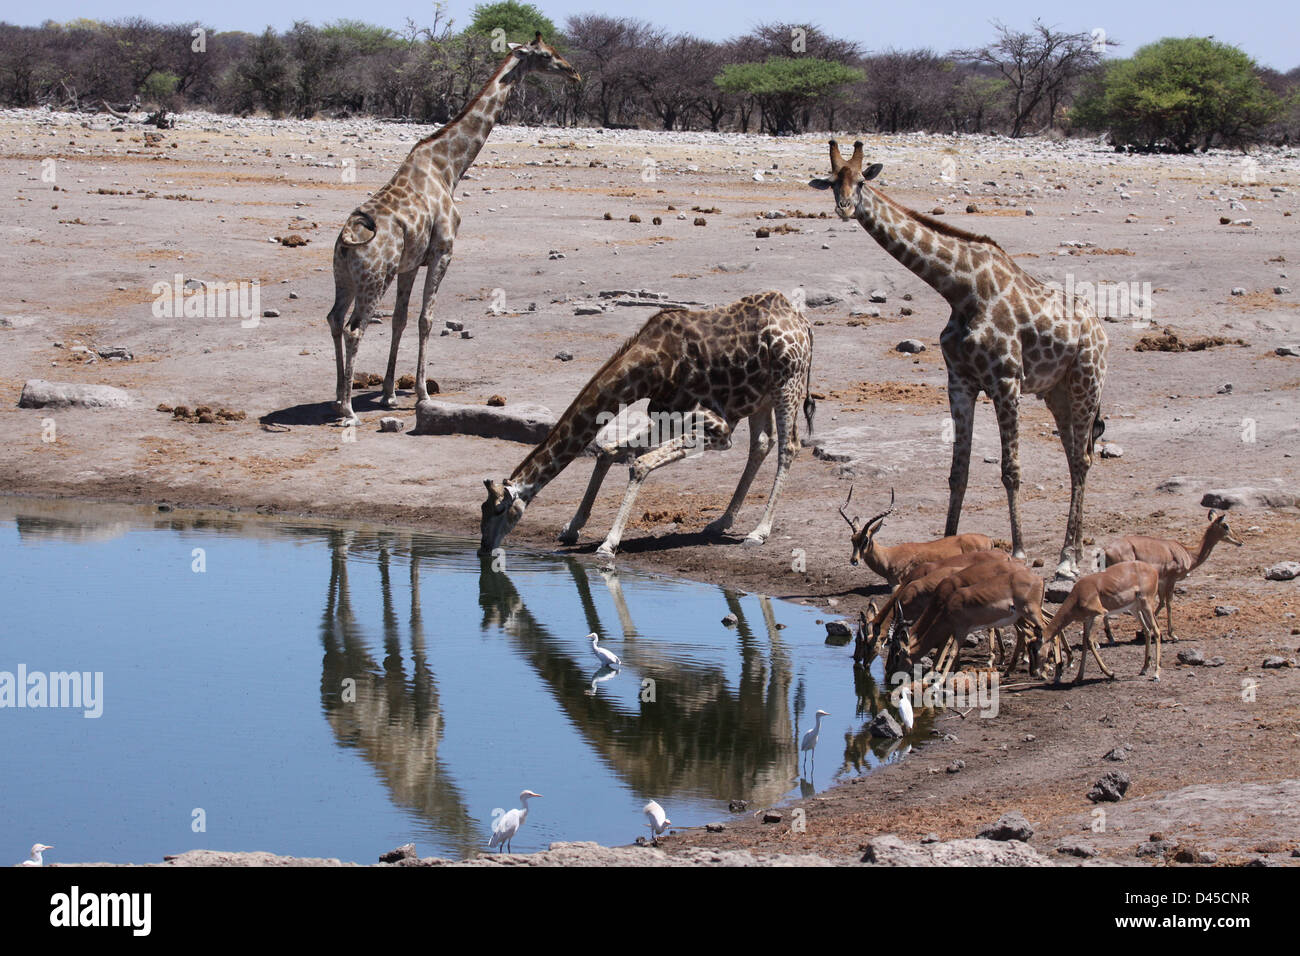 Giraffes by a water hole, with reflections, Etosha National Park, Namibia Stock Photo